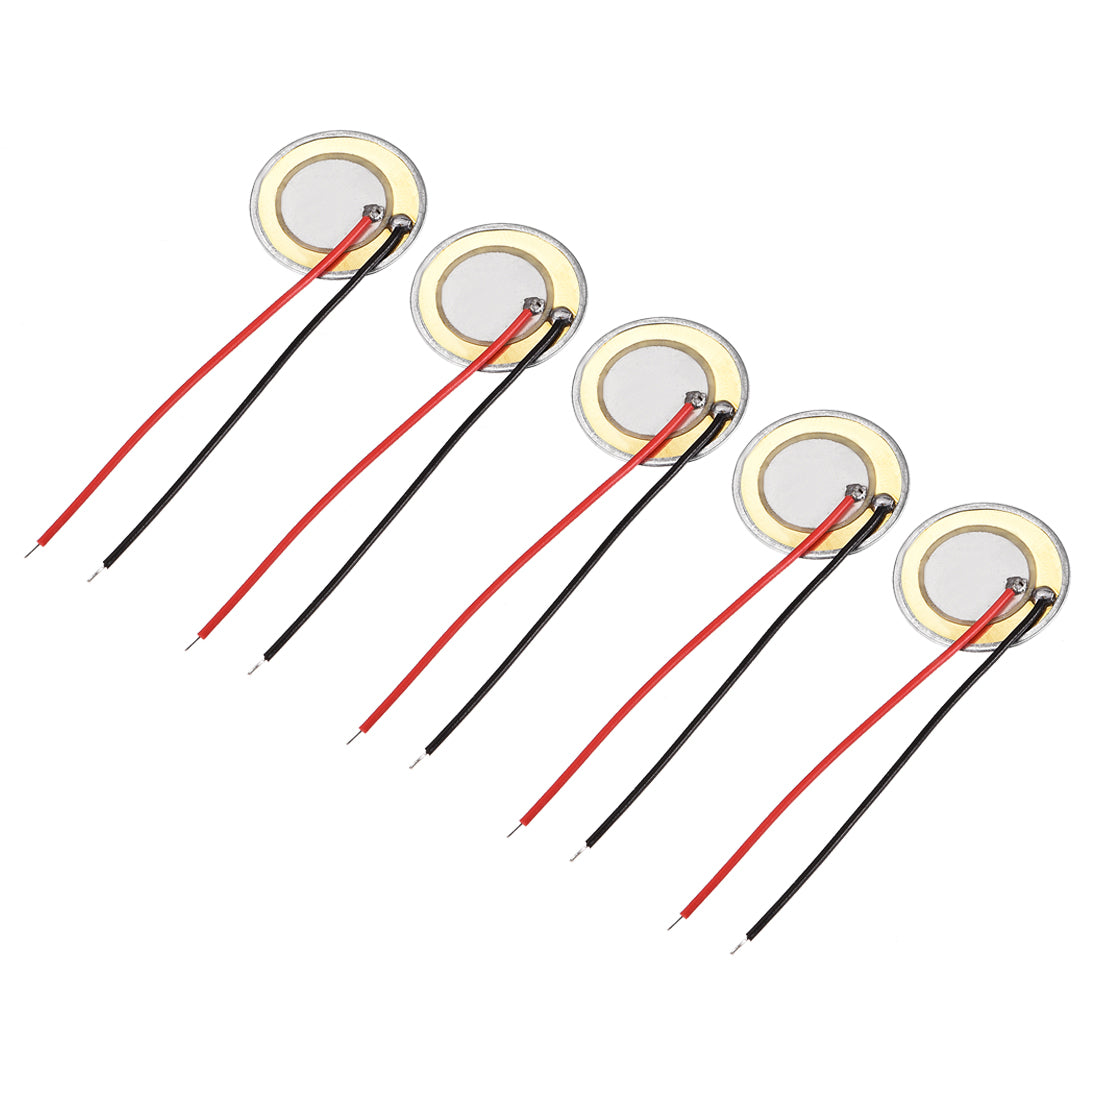 uxcell Uxcell 5 Pcs Piezo Discs 20mm Acoustic Pickup Transducer Microphone Trigger Element CBG Guitar